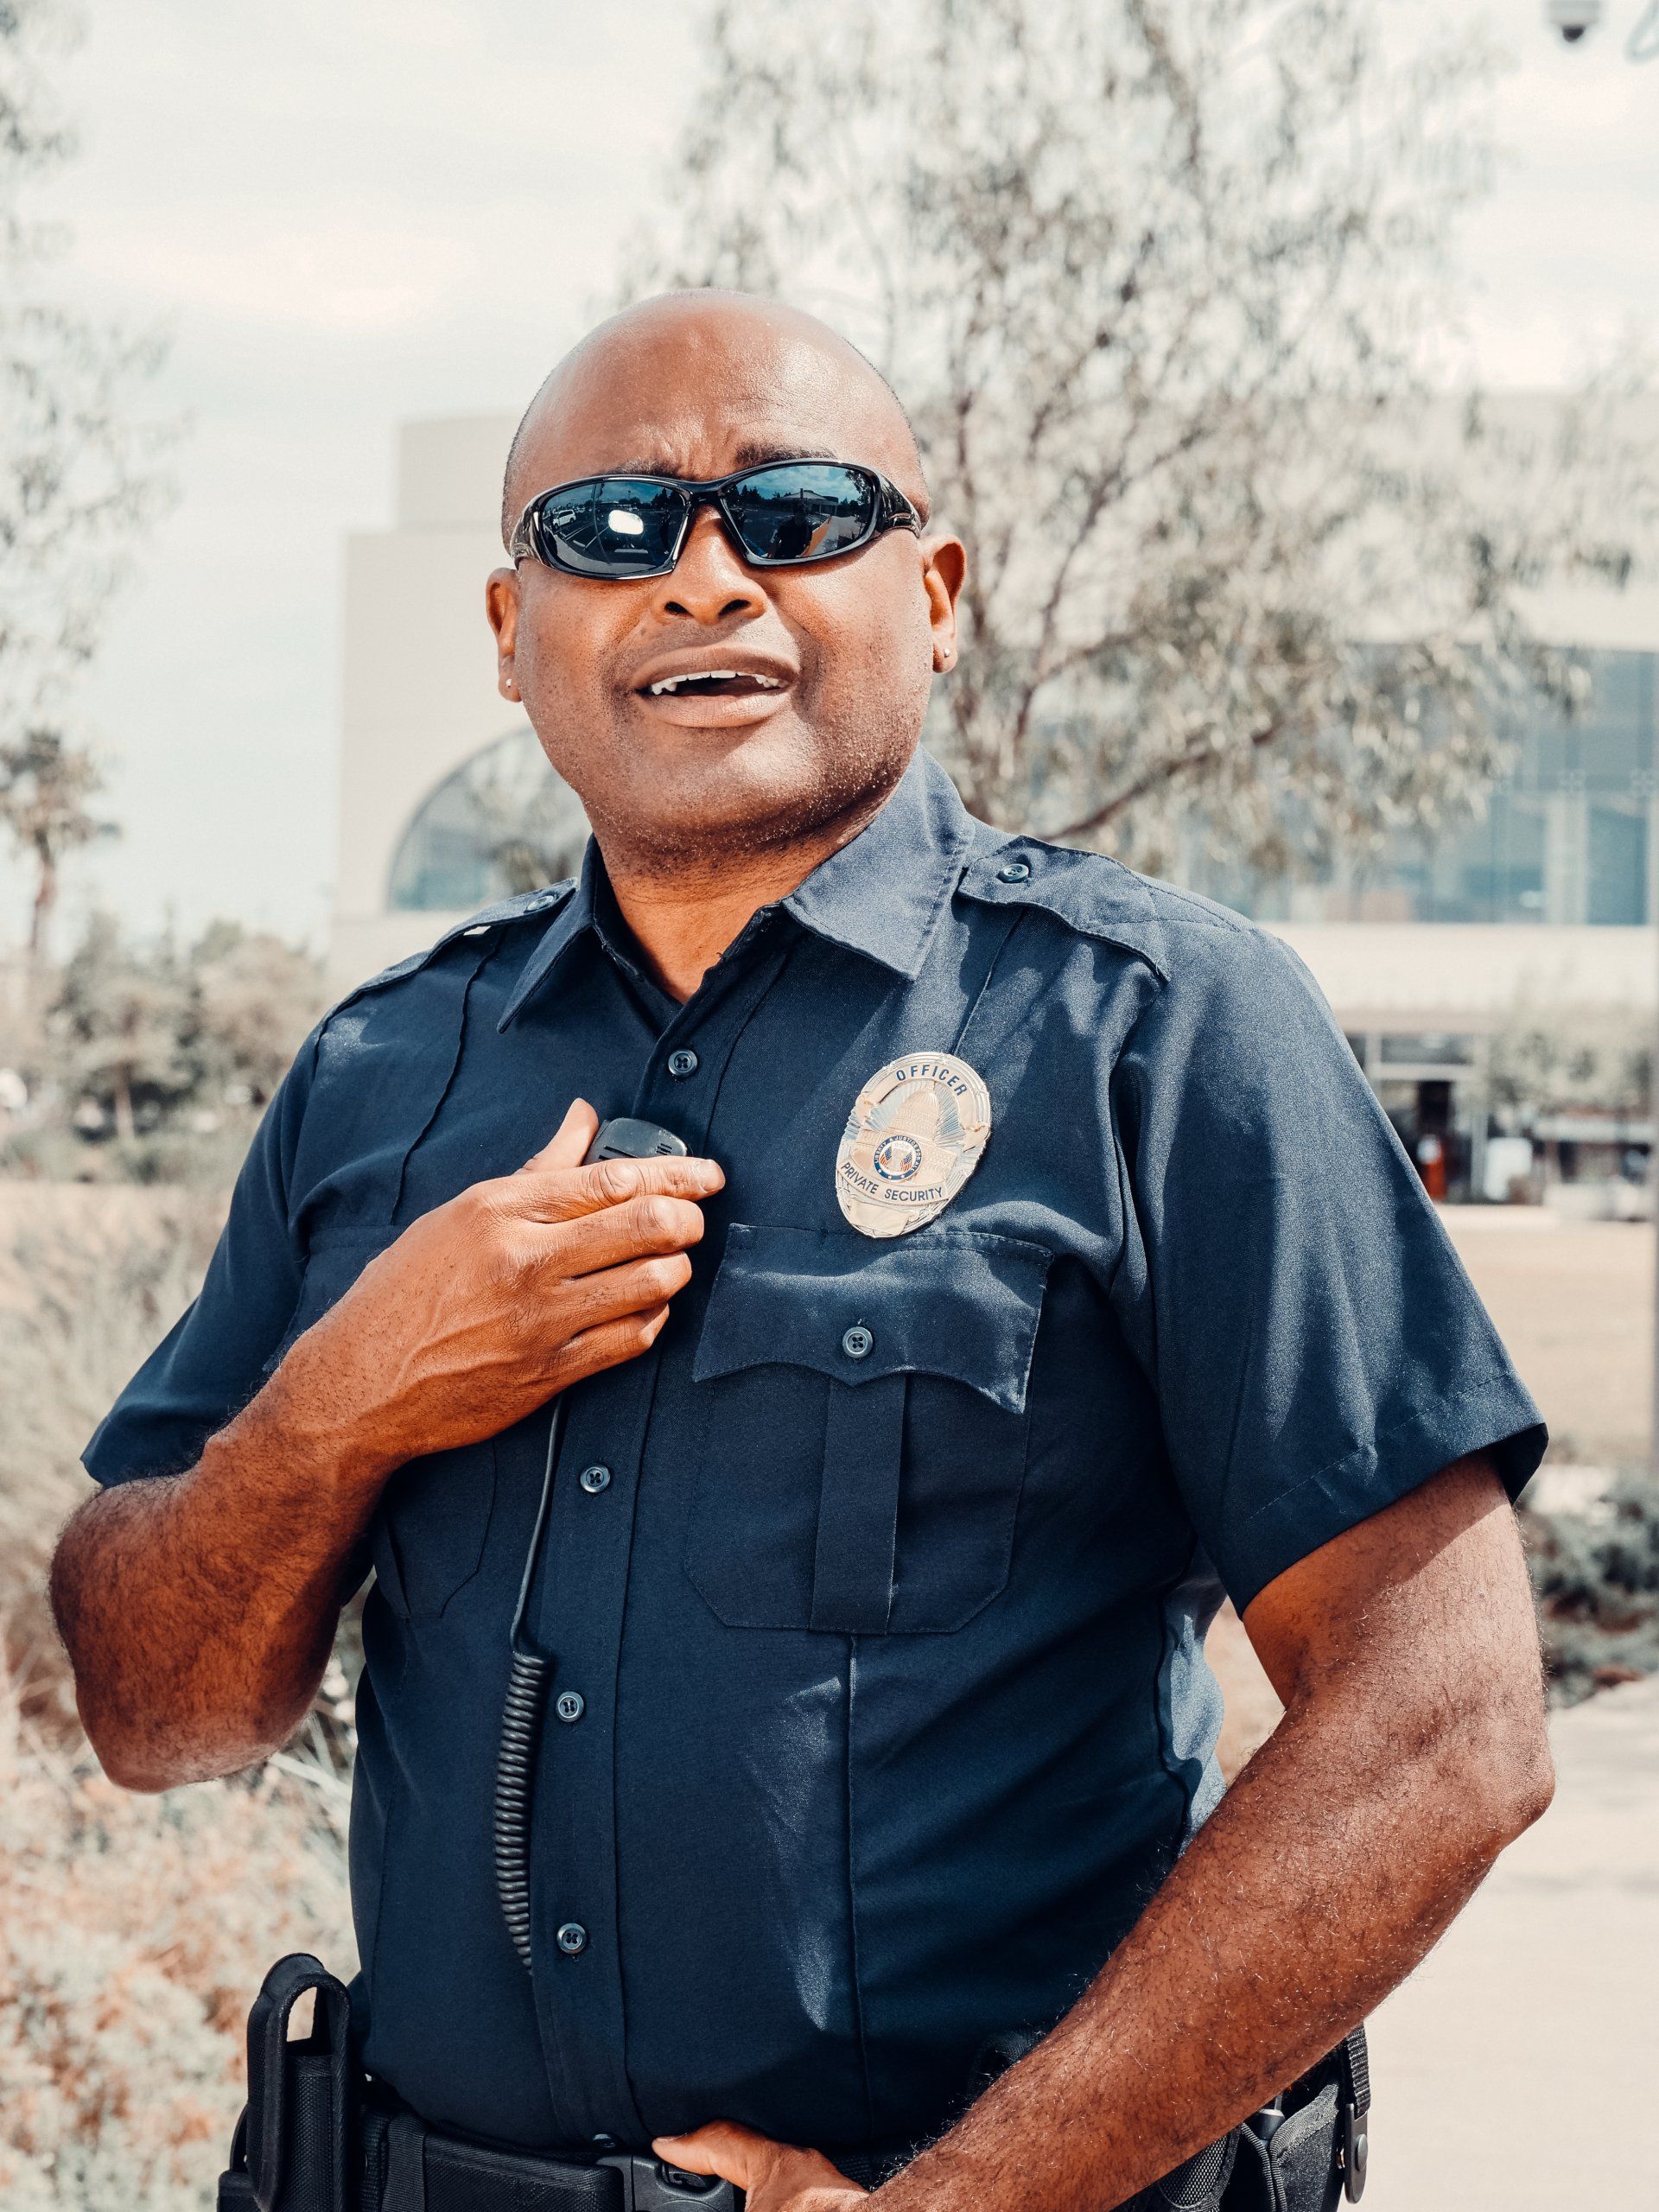 a police officer wearing sunglasses and a badge that says sheriff